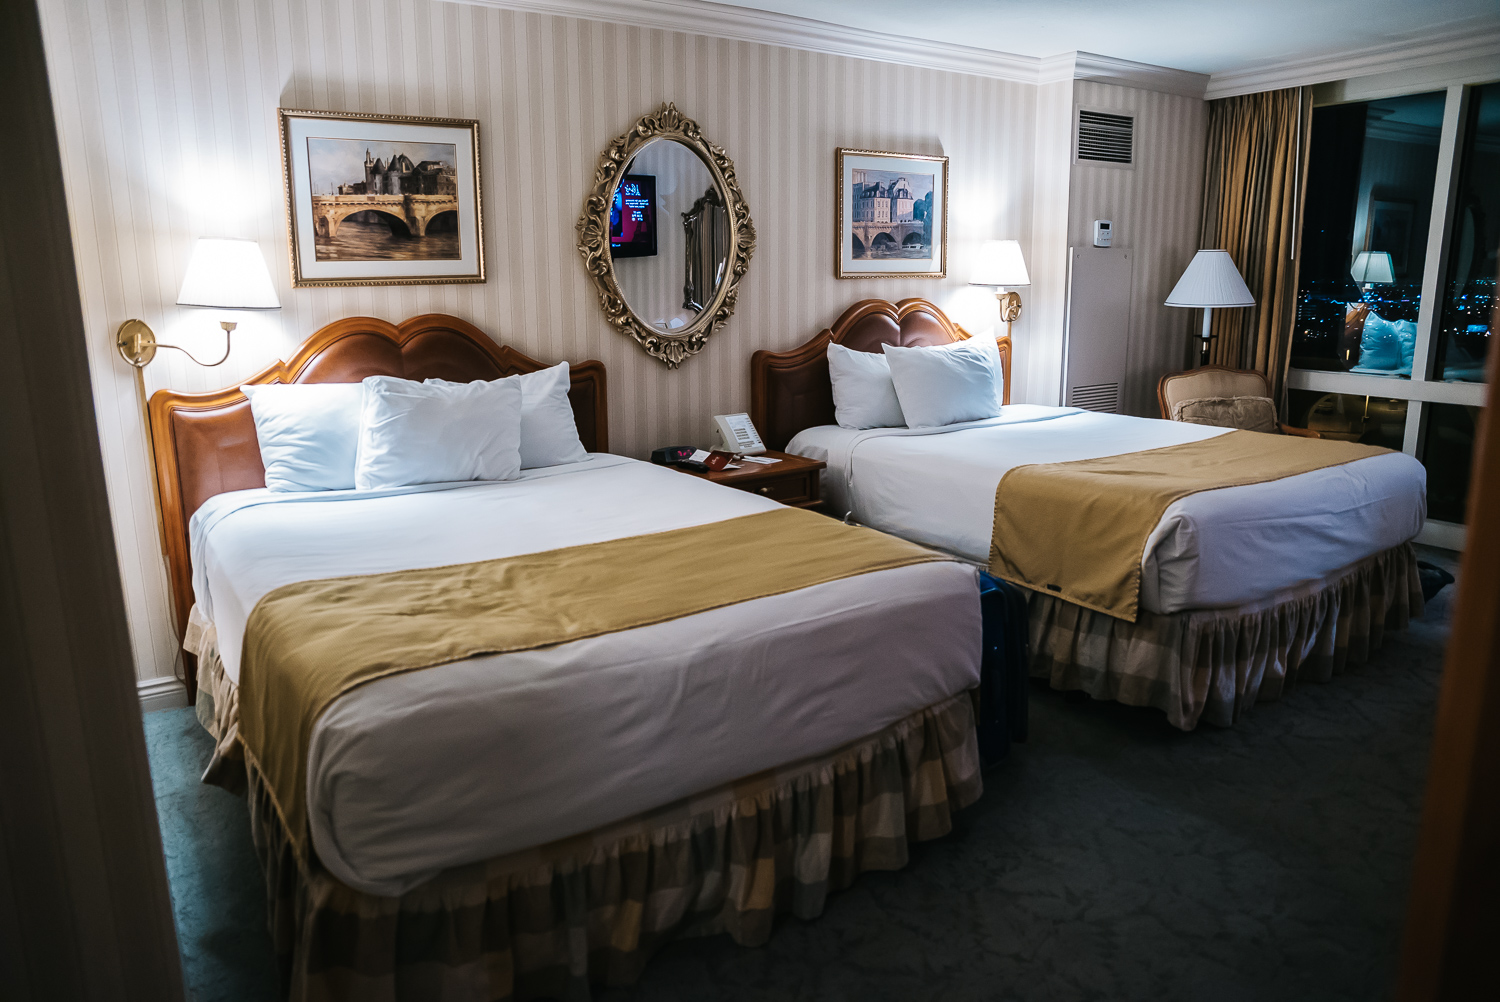 You Must Stay at the Paris Hotel in Las Vegas - Travel Pockets